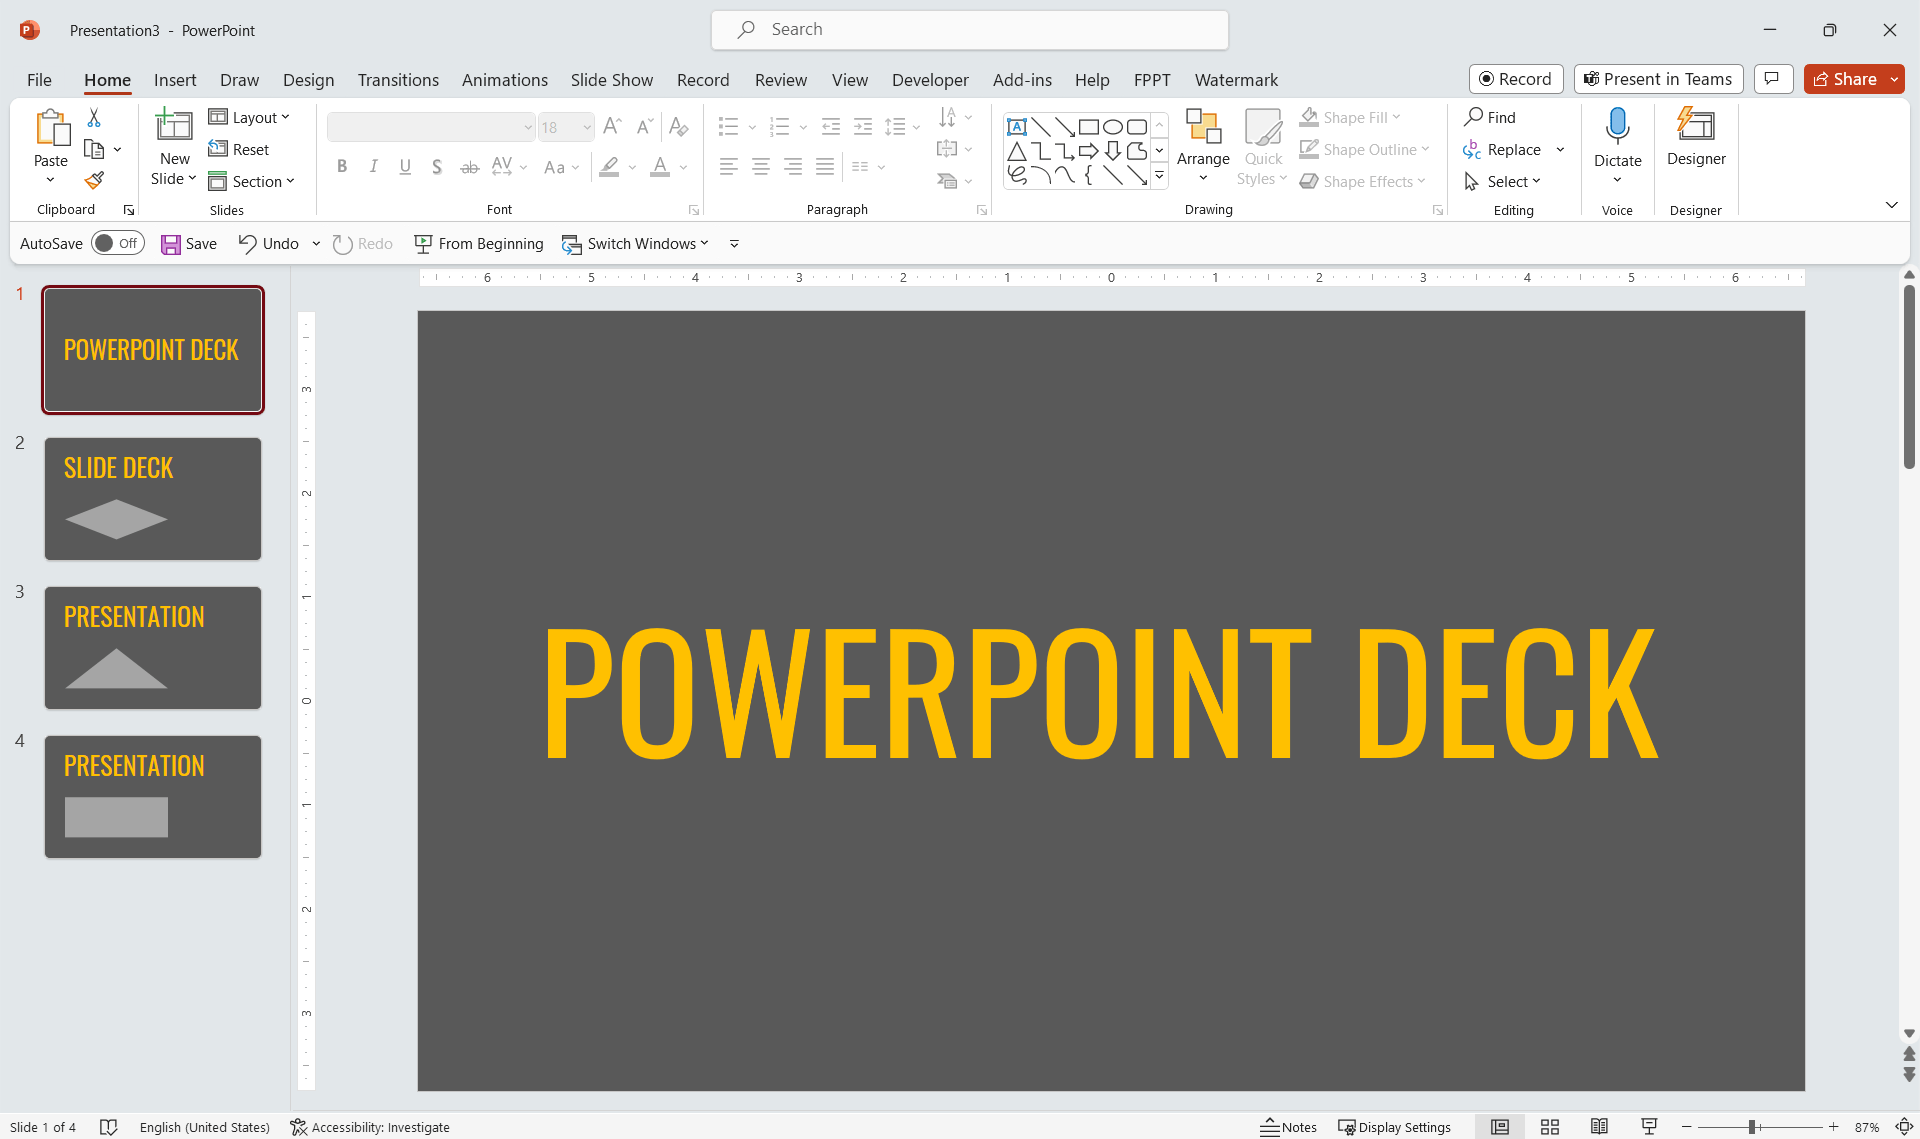 What is a PowerPoint Deck? Slide Decks for Presentations